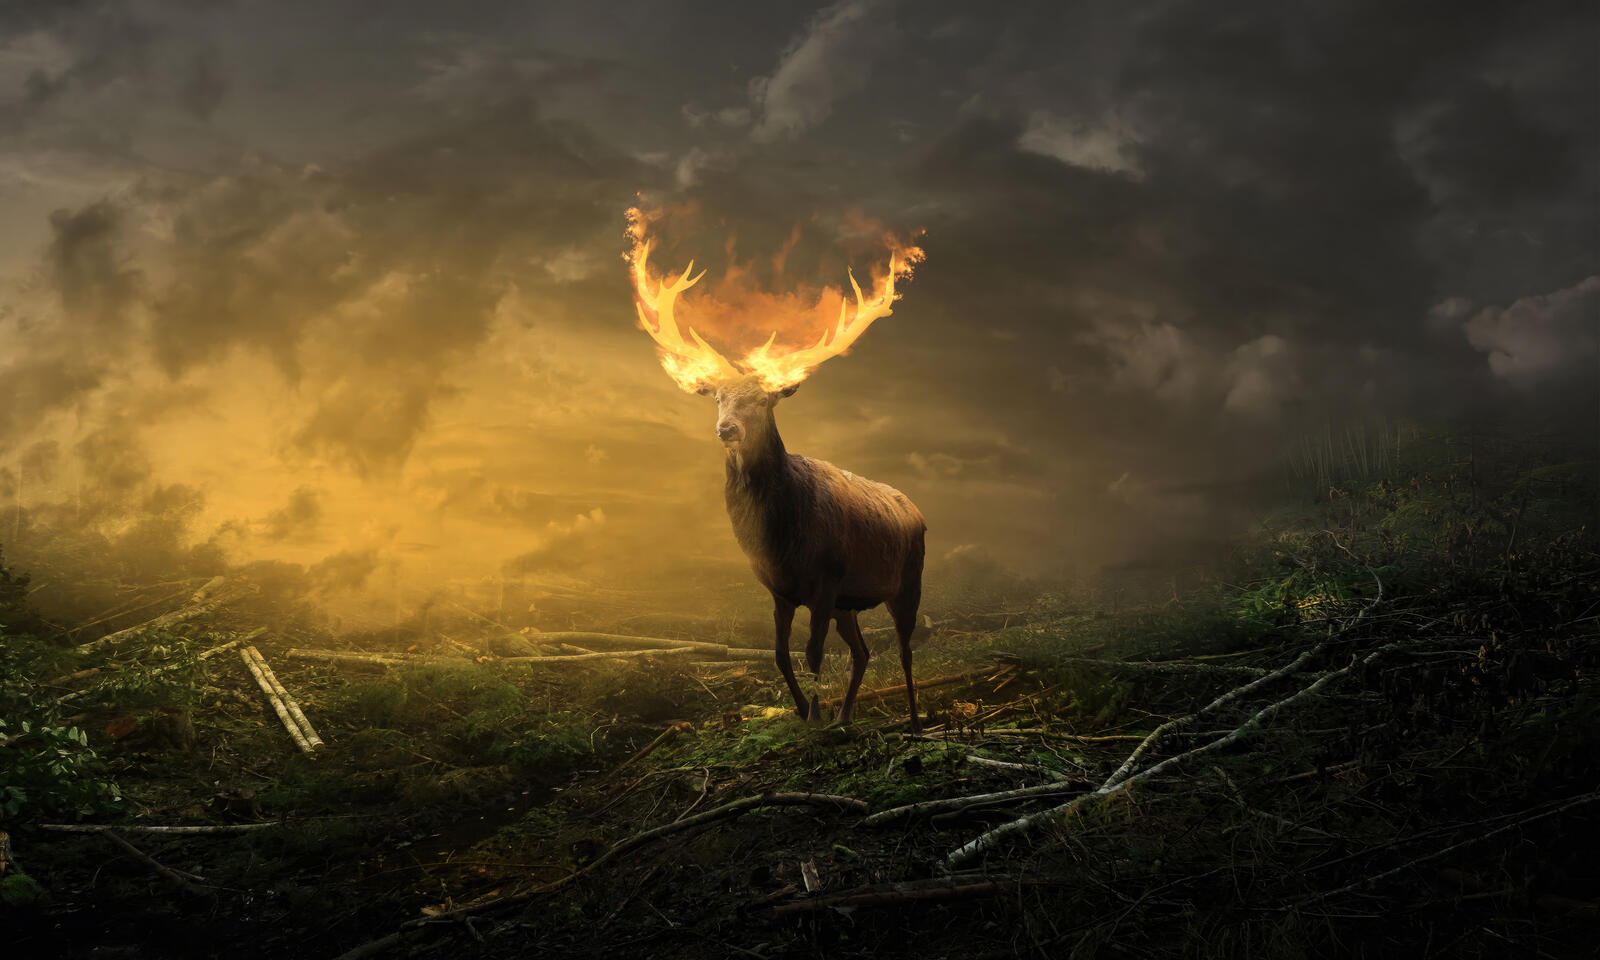 Free photo A deer with barking antlers in a smoky field